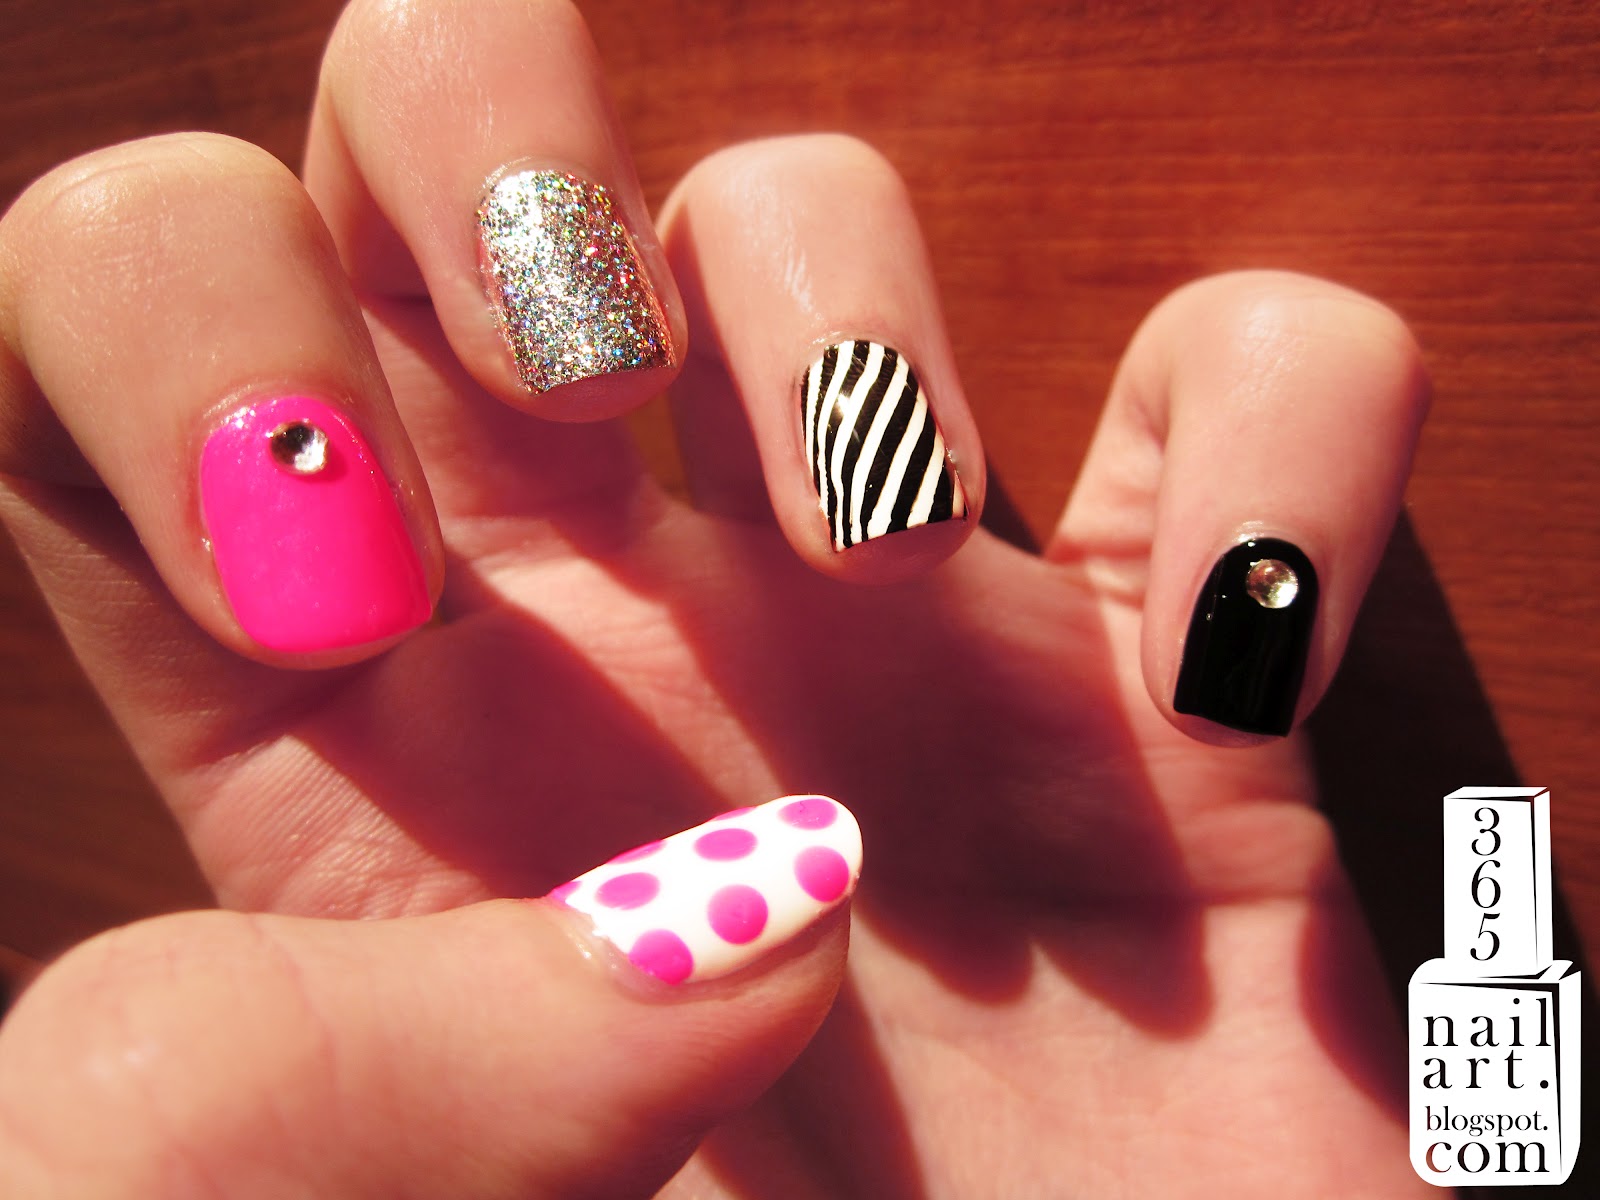 5. 80 Nail Designs for Short Nails - wide 1